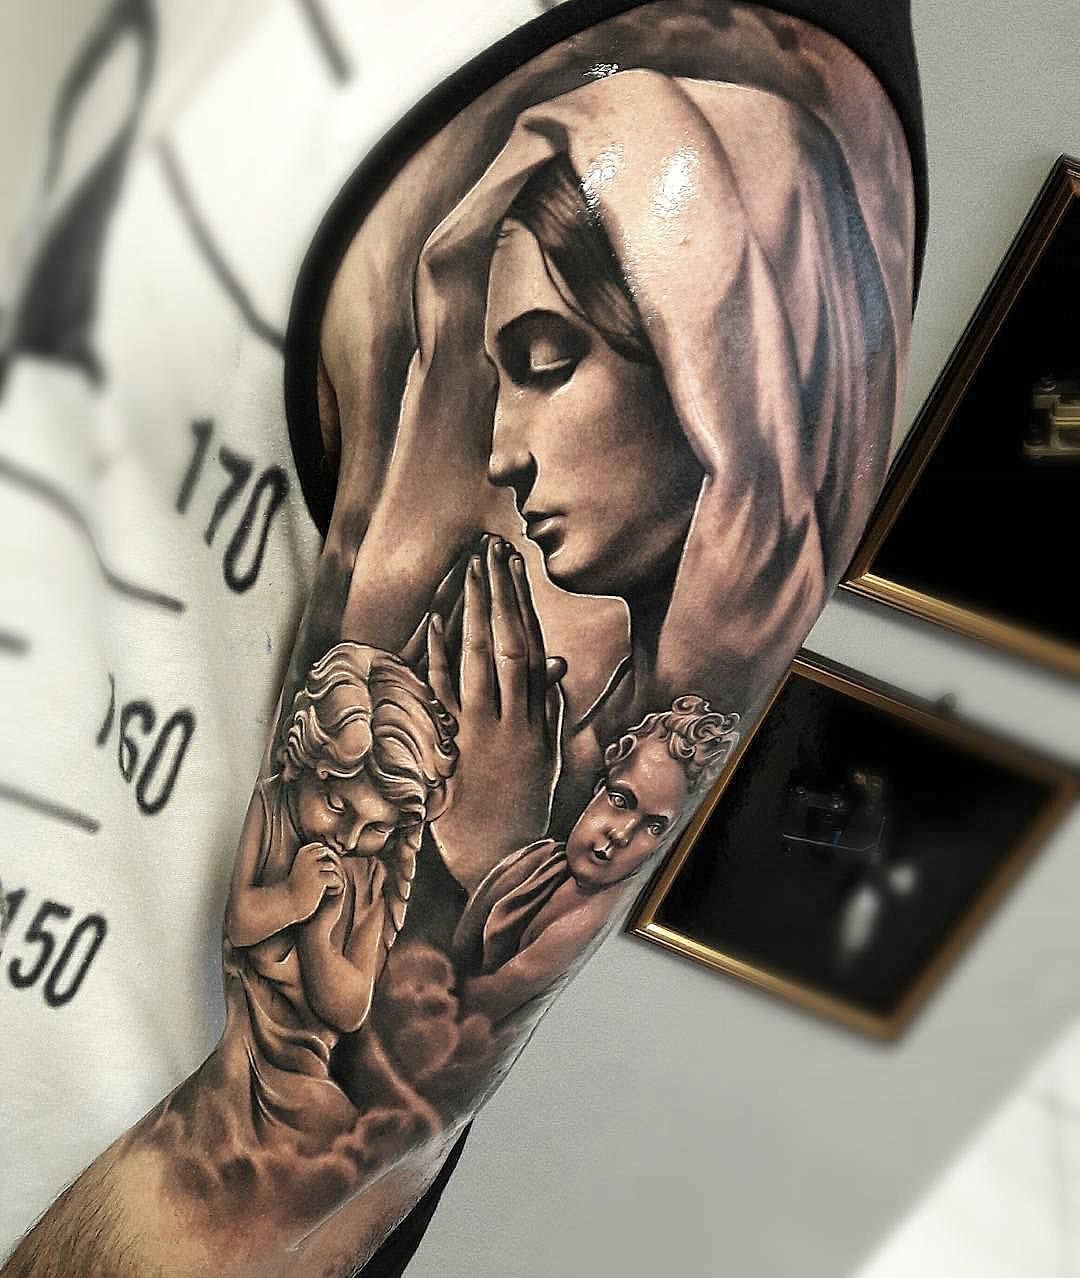 Tattoo of praying hands with the Virgin Mary